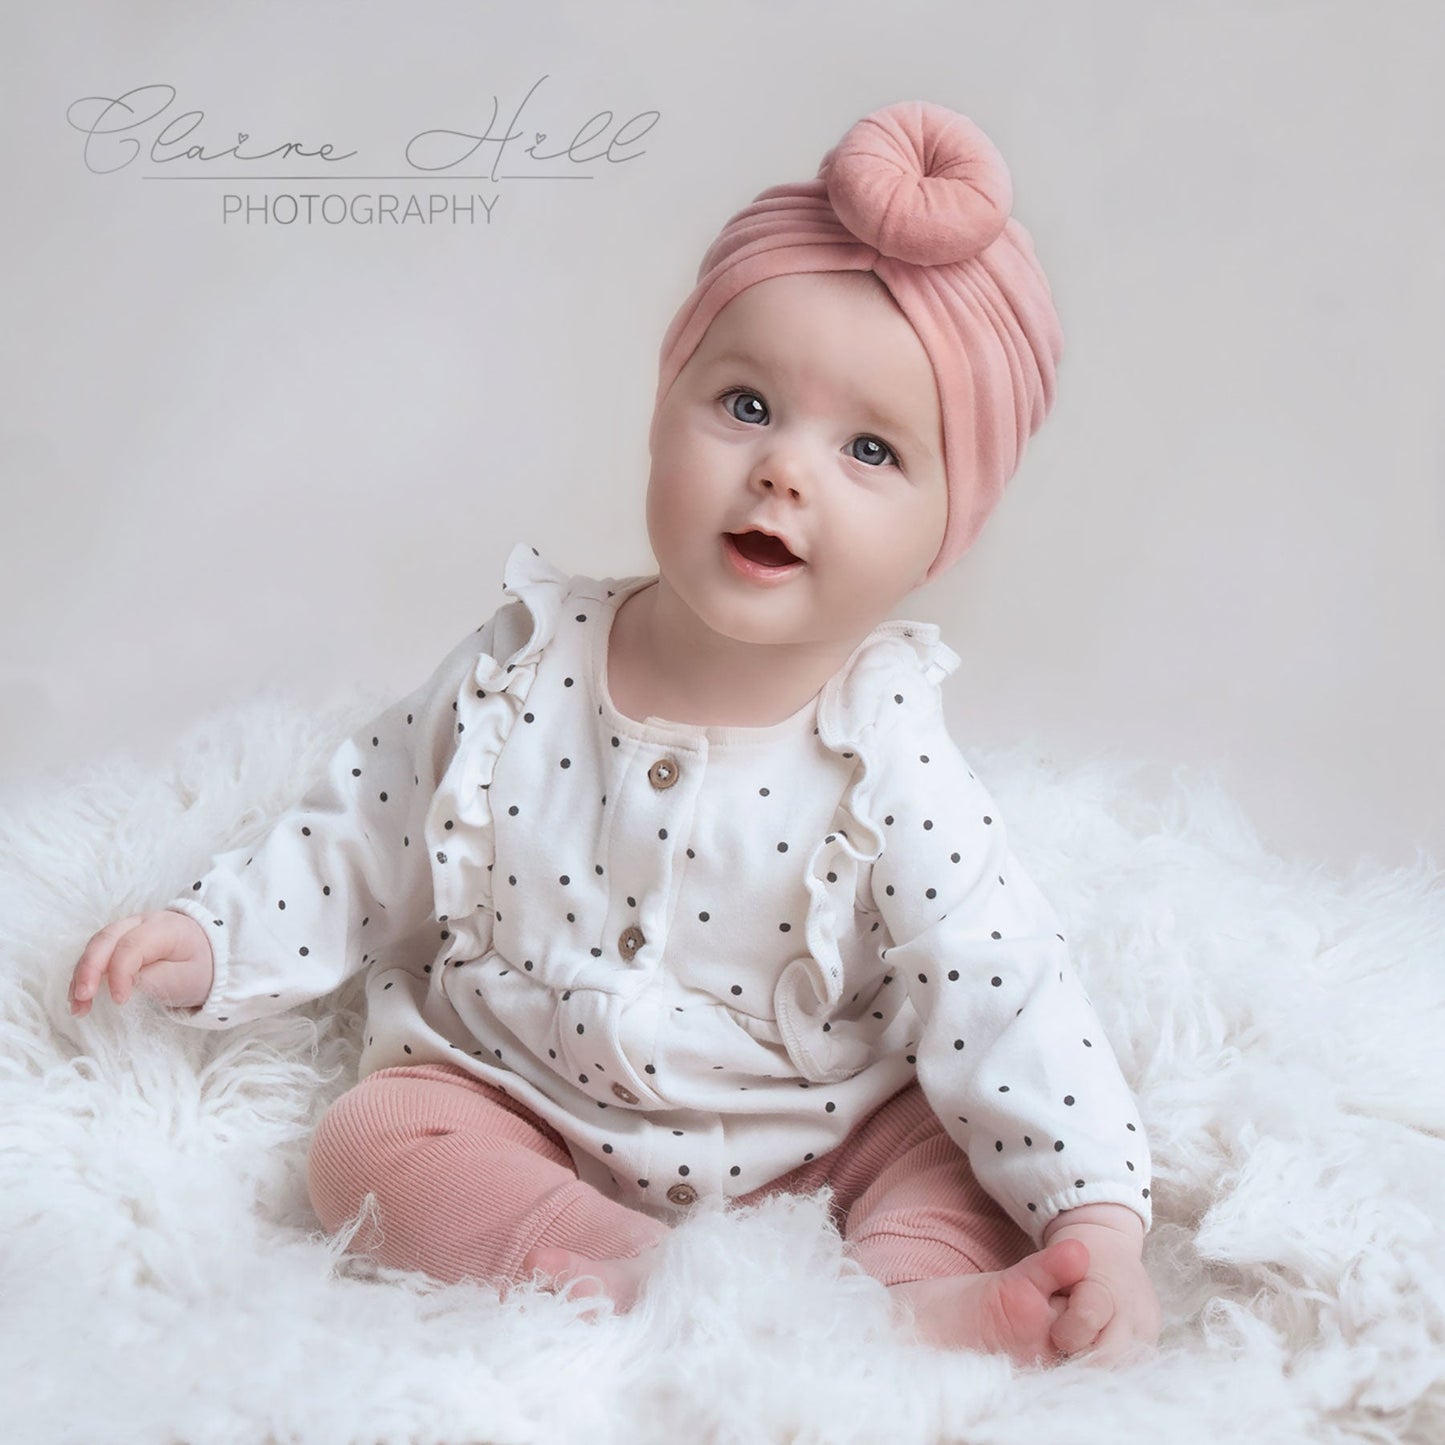 Professional sitter photography photos by Claire Hill Photography. Studio based in  Perton Wolverhampton West Midlands and Shropshire book today